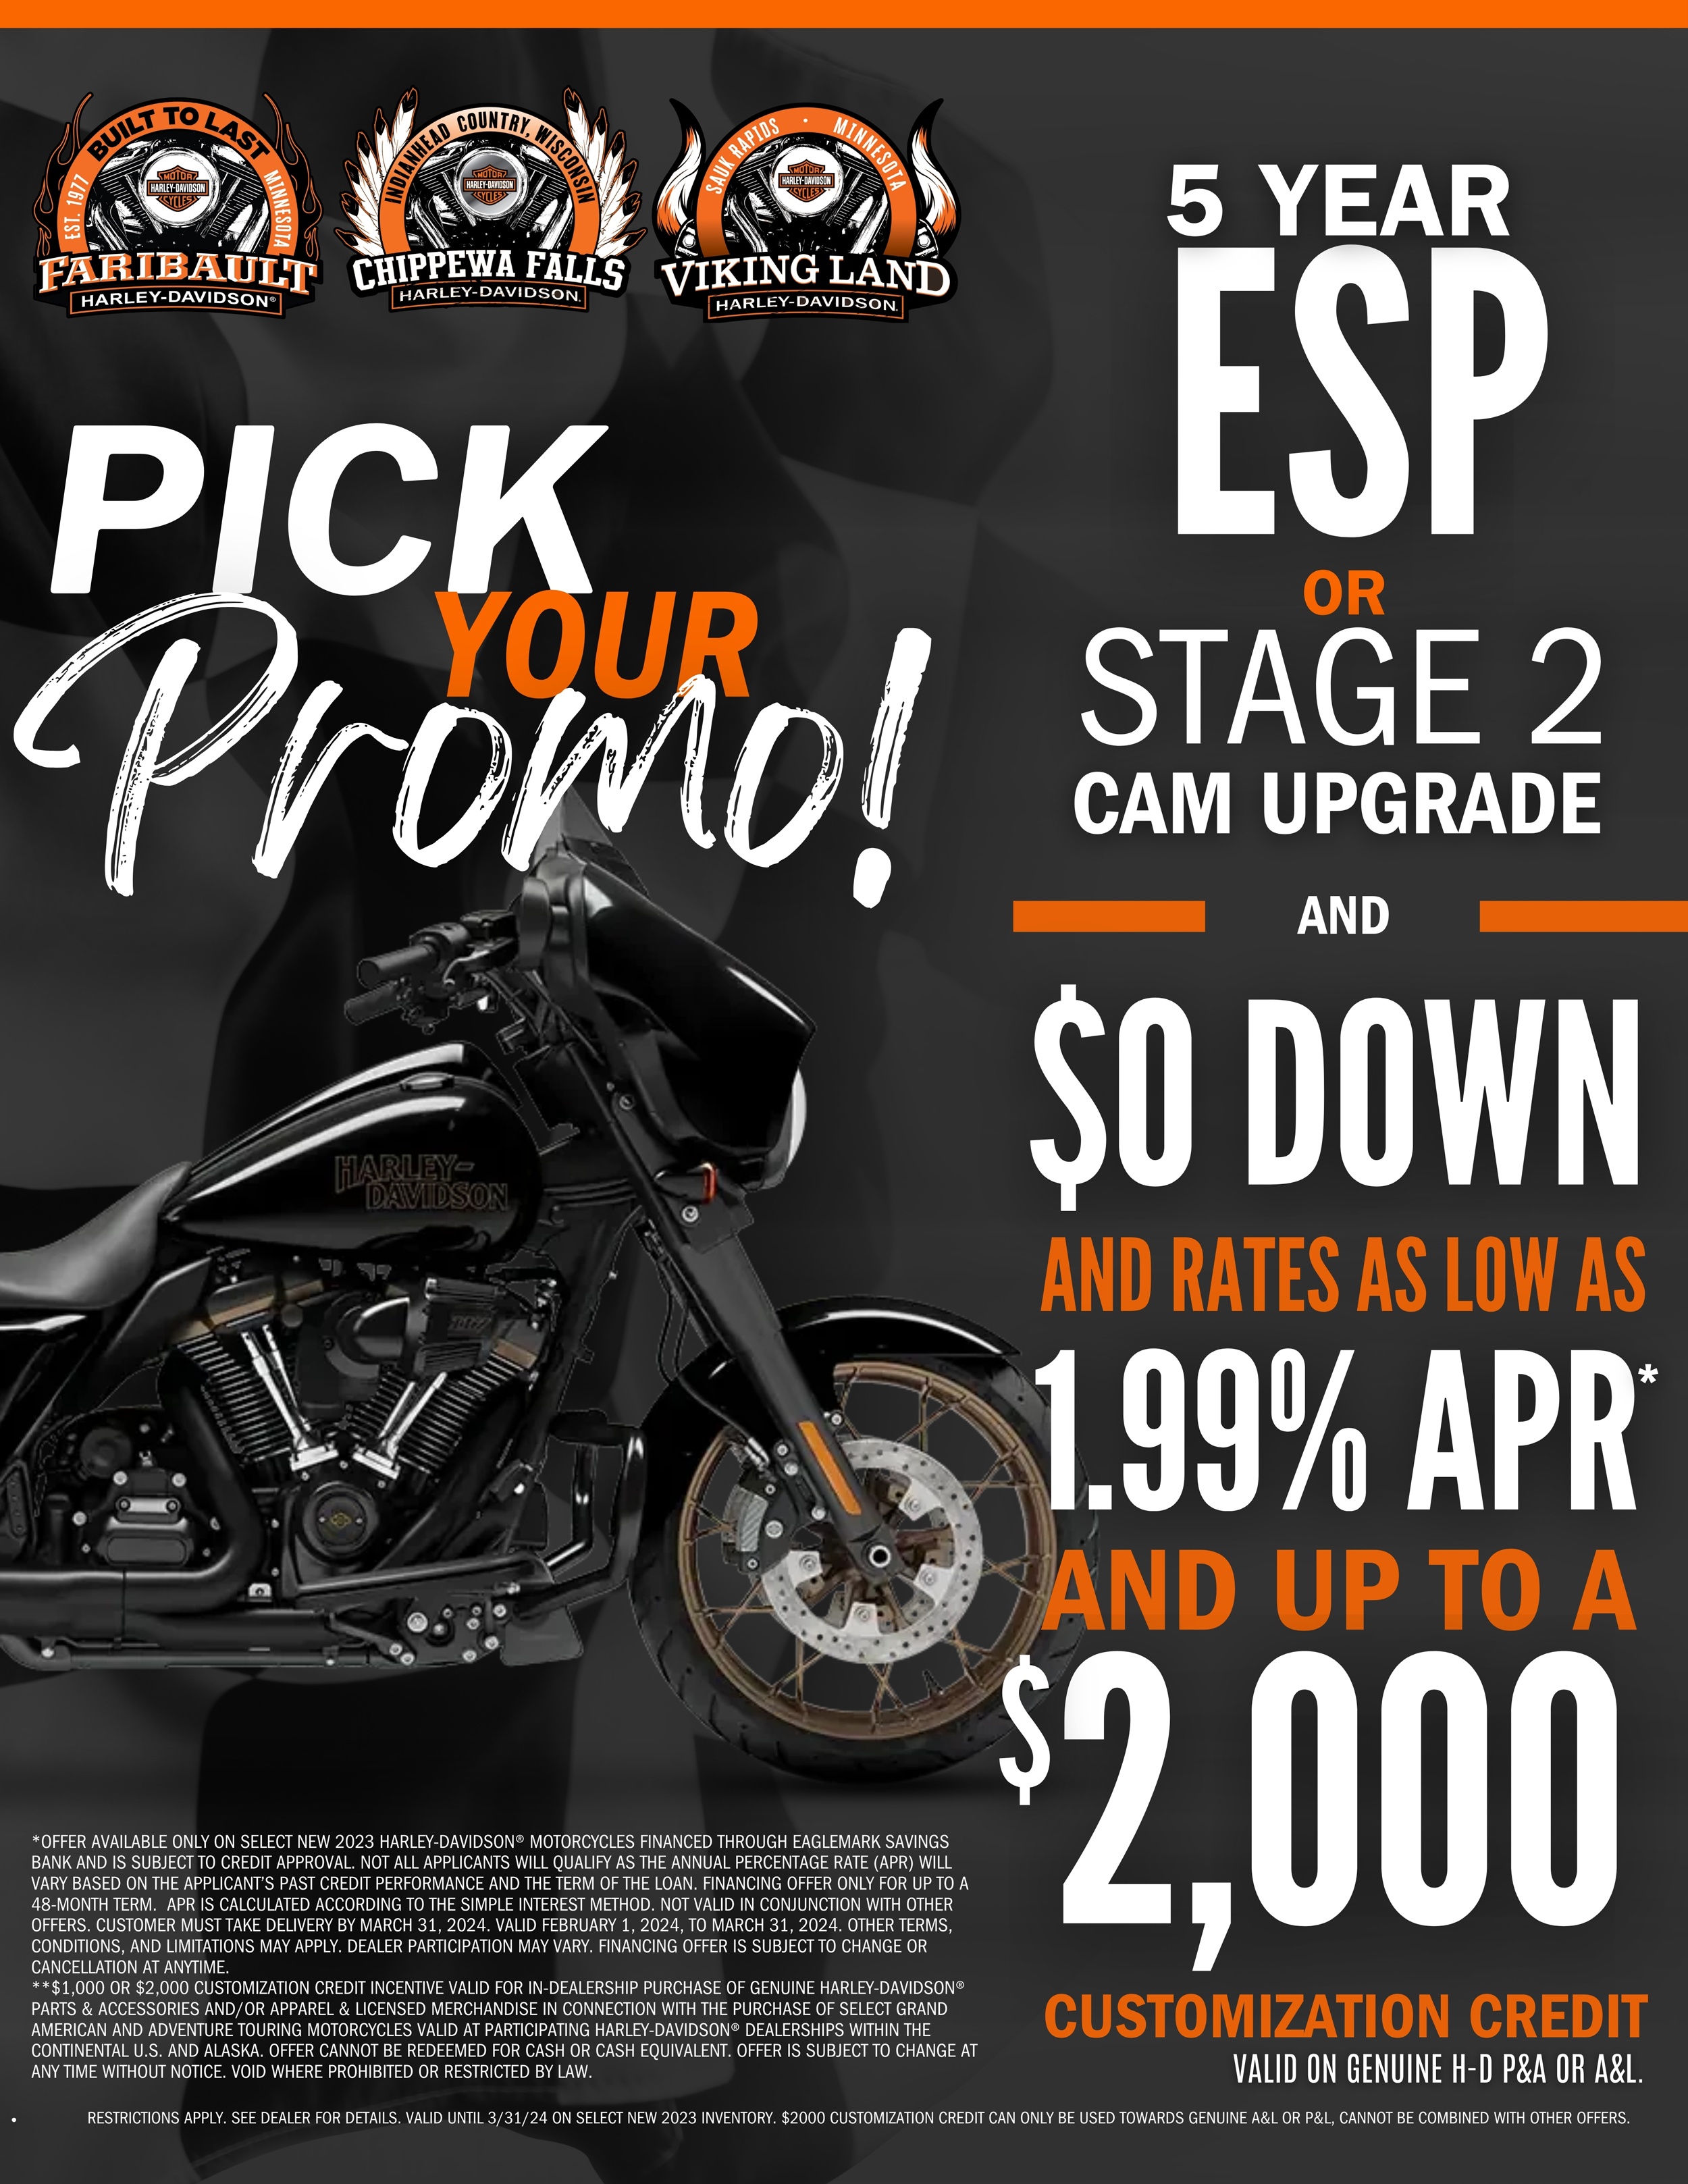 Pick Your Promotion on new 2023 motorcycles this March at Chippewa Falls Harley-Davidson during the Model year Sale